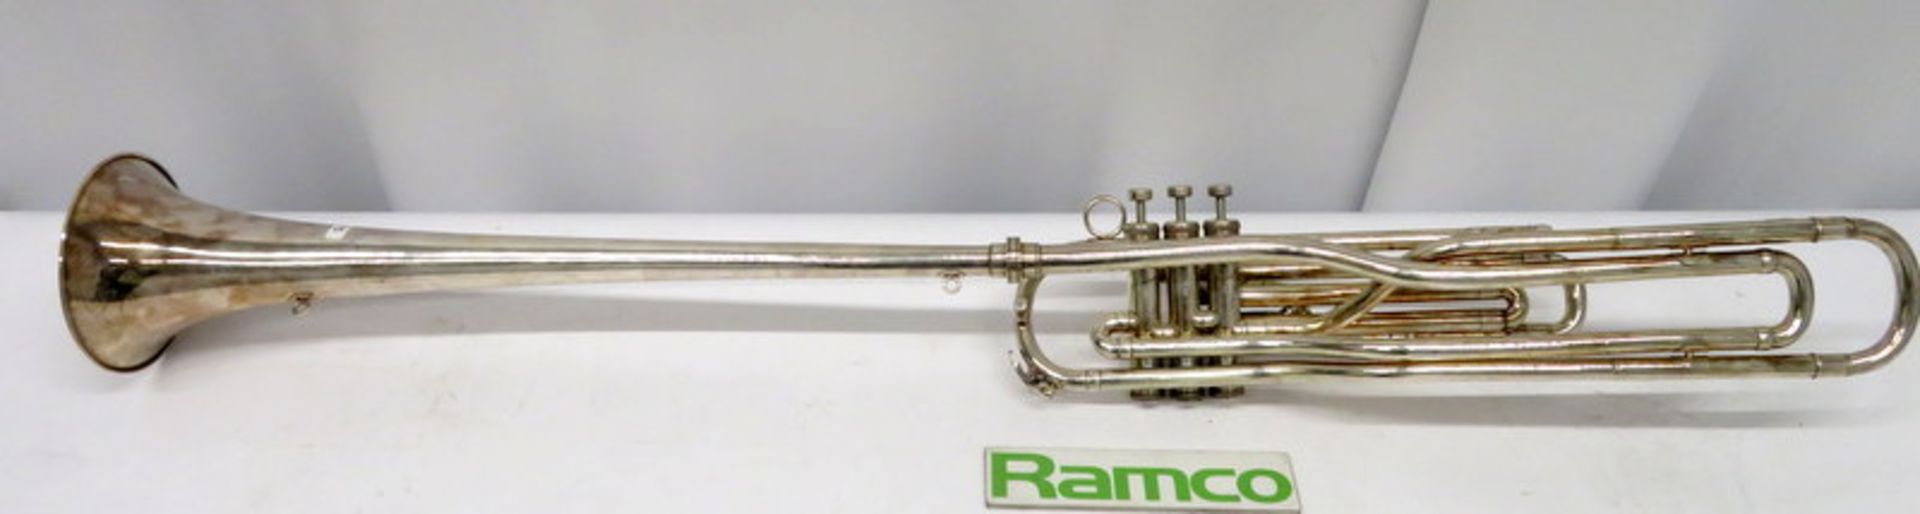 Boosey & Hawkes Imperial Fanfare Trumpet With Case. Serial Number: 591890. Please Note T - Image 3 of 14